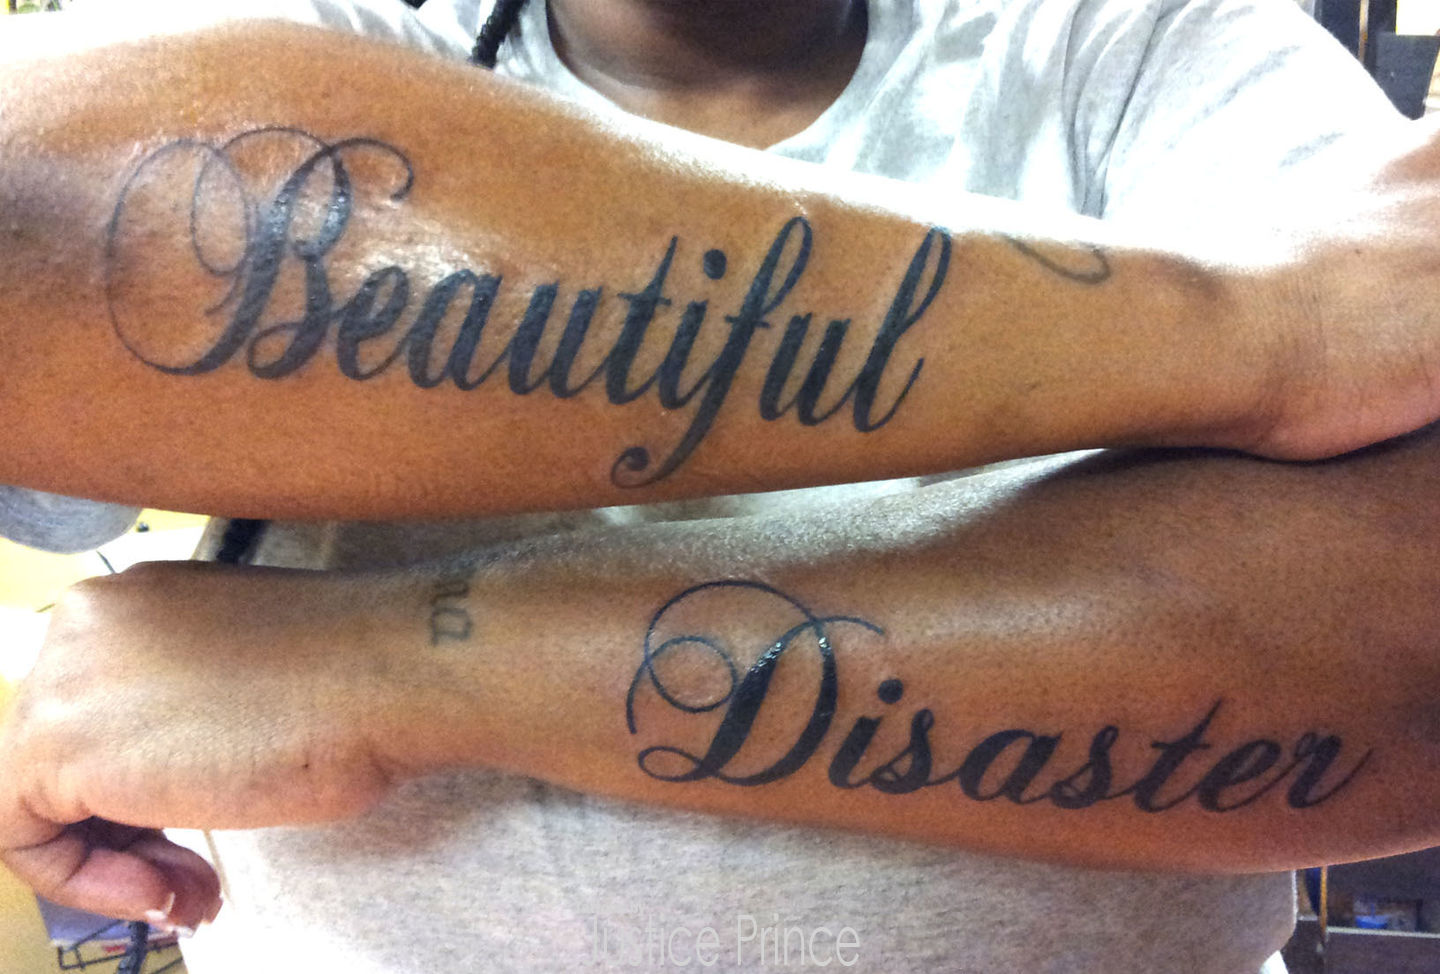 Johnny Bravo on Instagram She said that beautiful disaster was the  phrase that best described her life script scripttattoo words tattoo  tattooideas